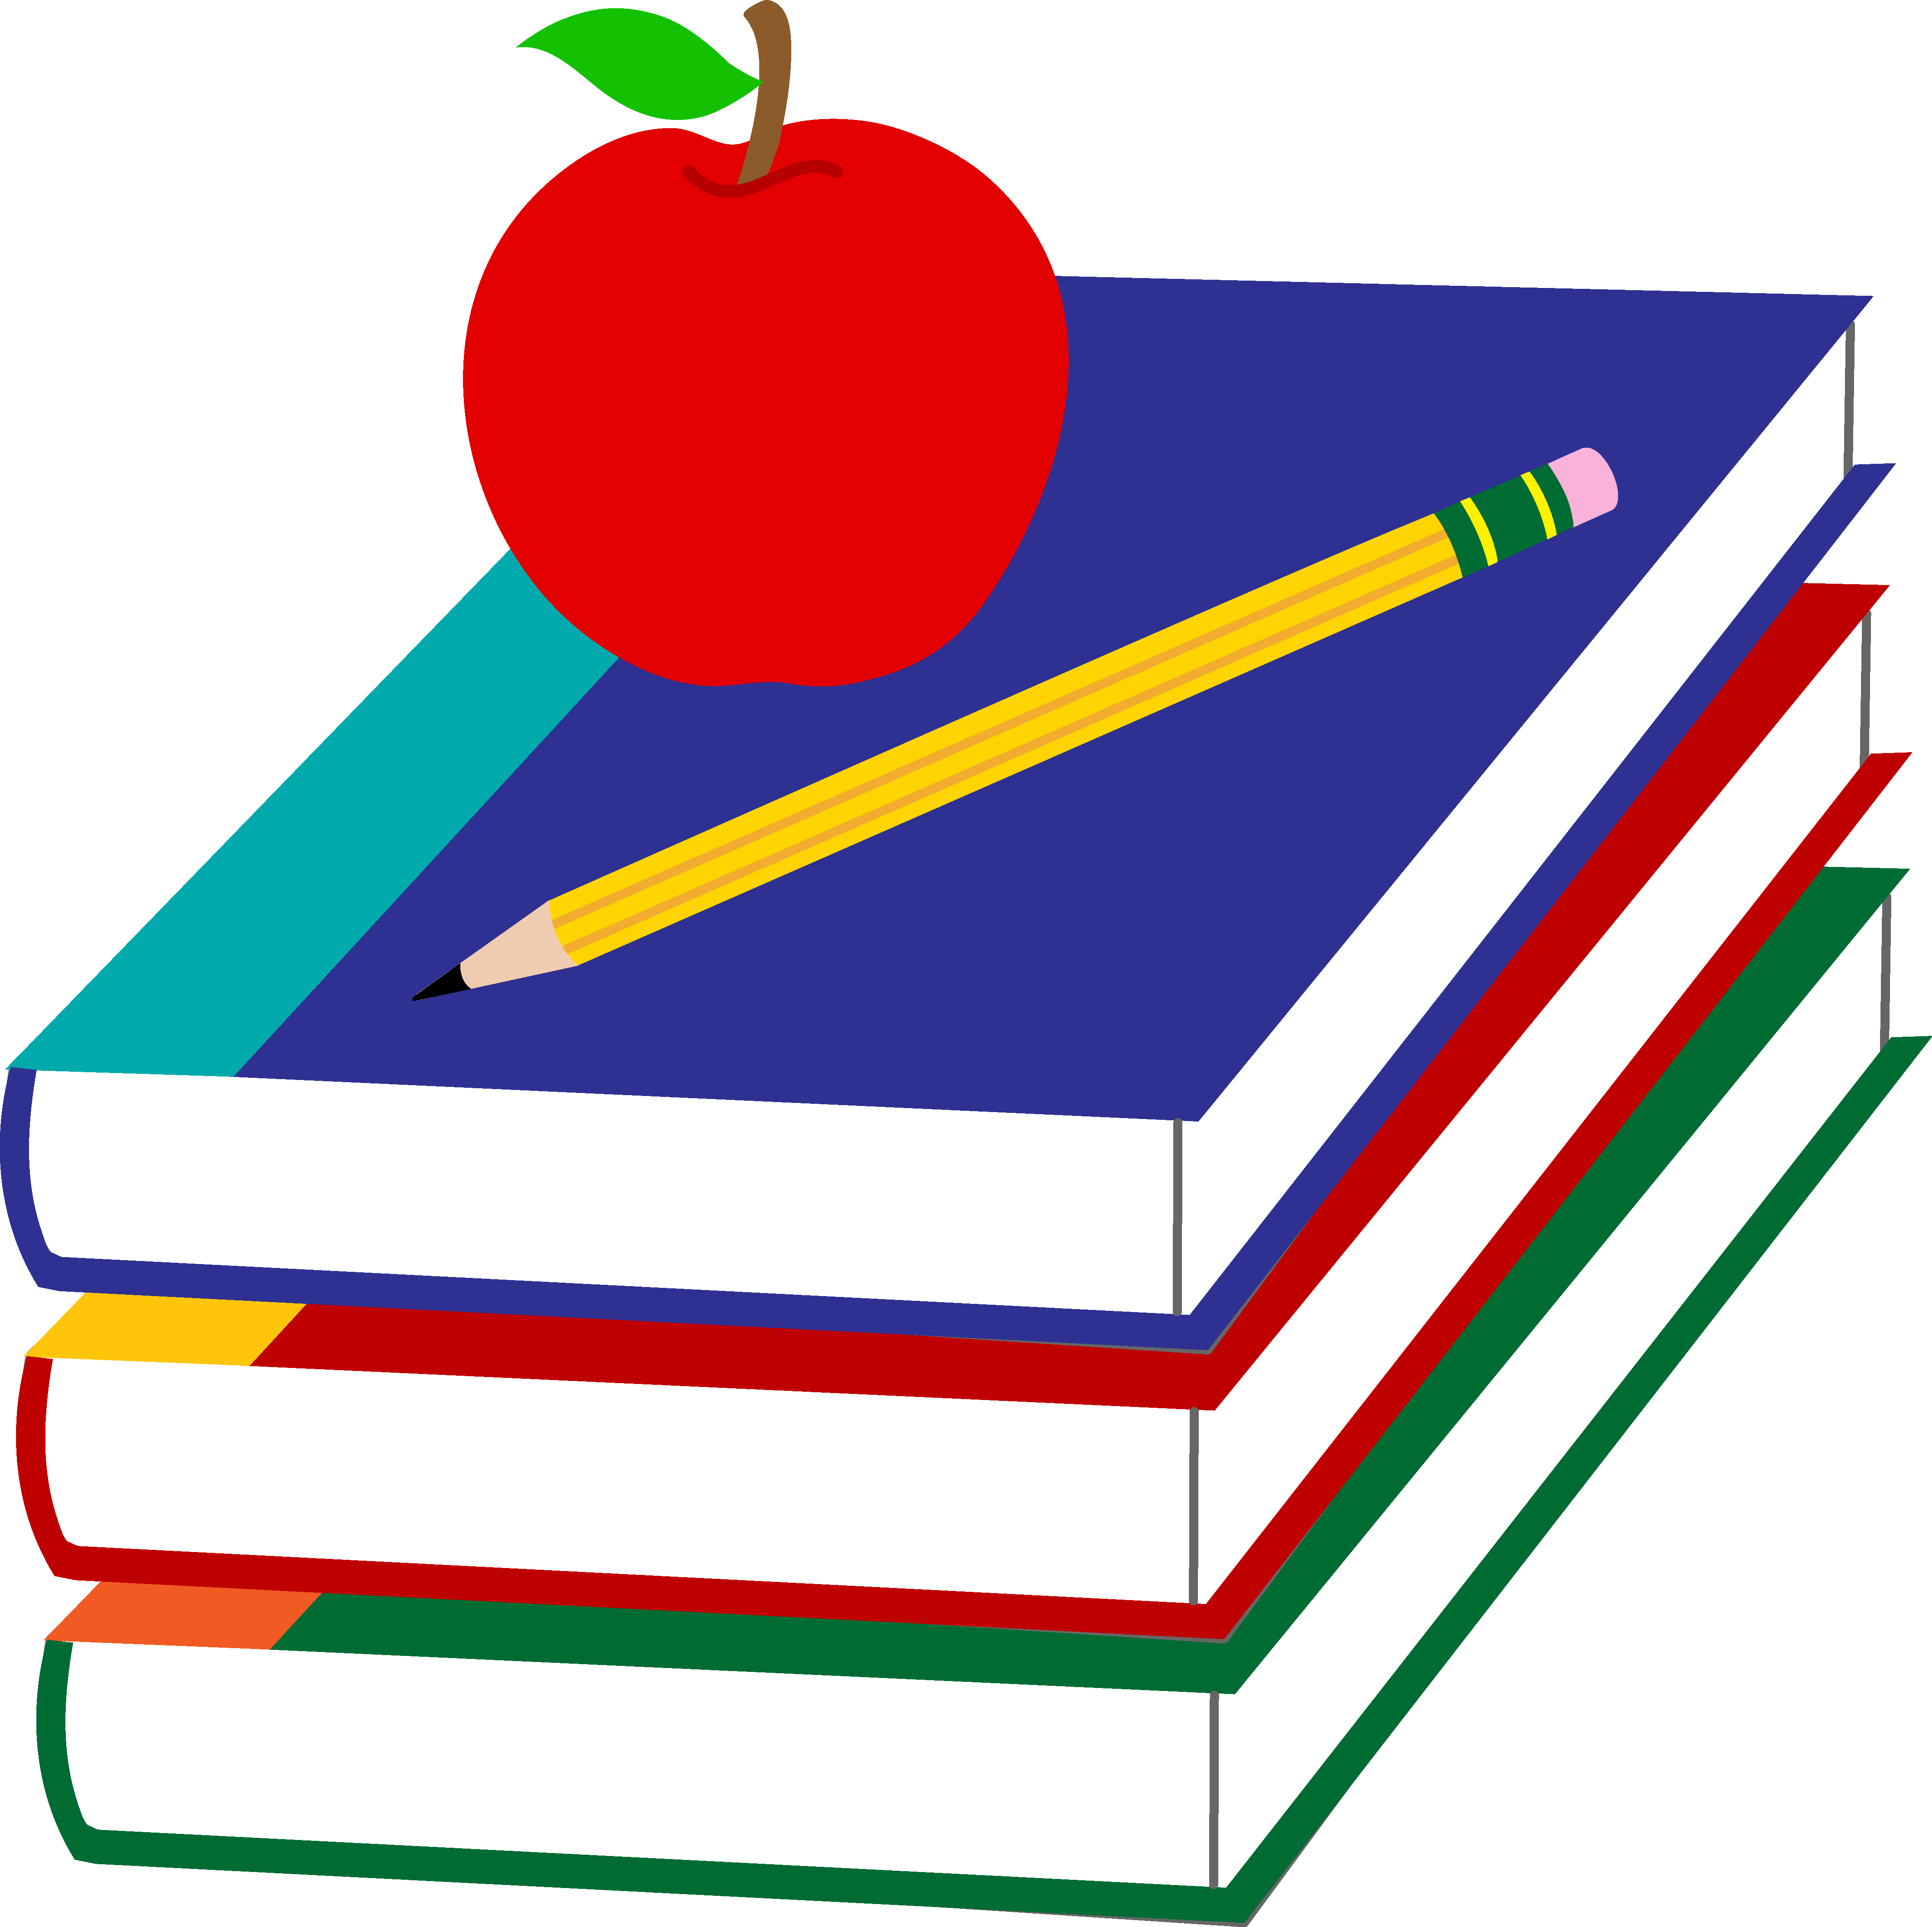 Apple And Books Clipart Clipart Best.